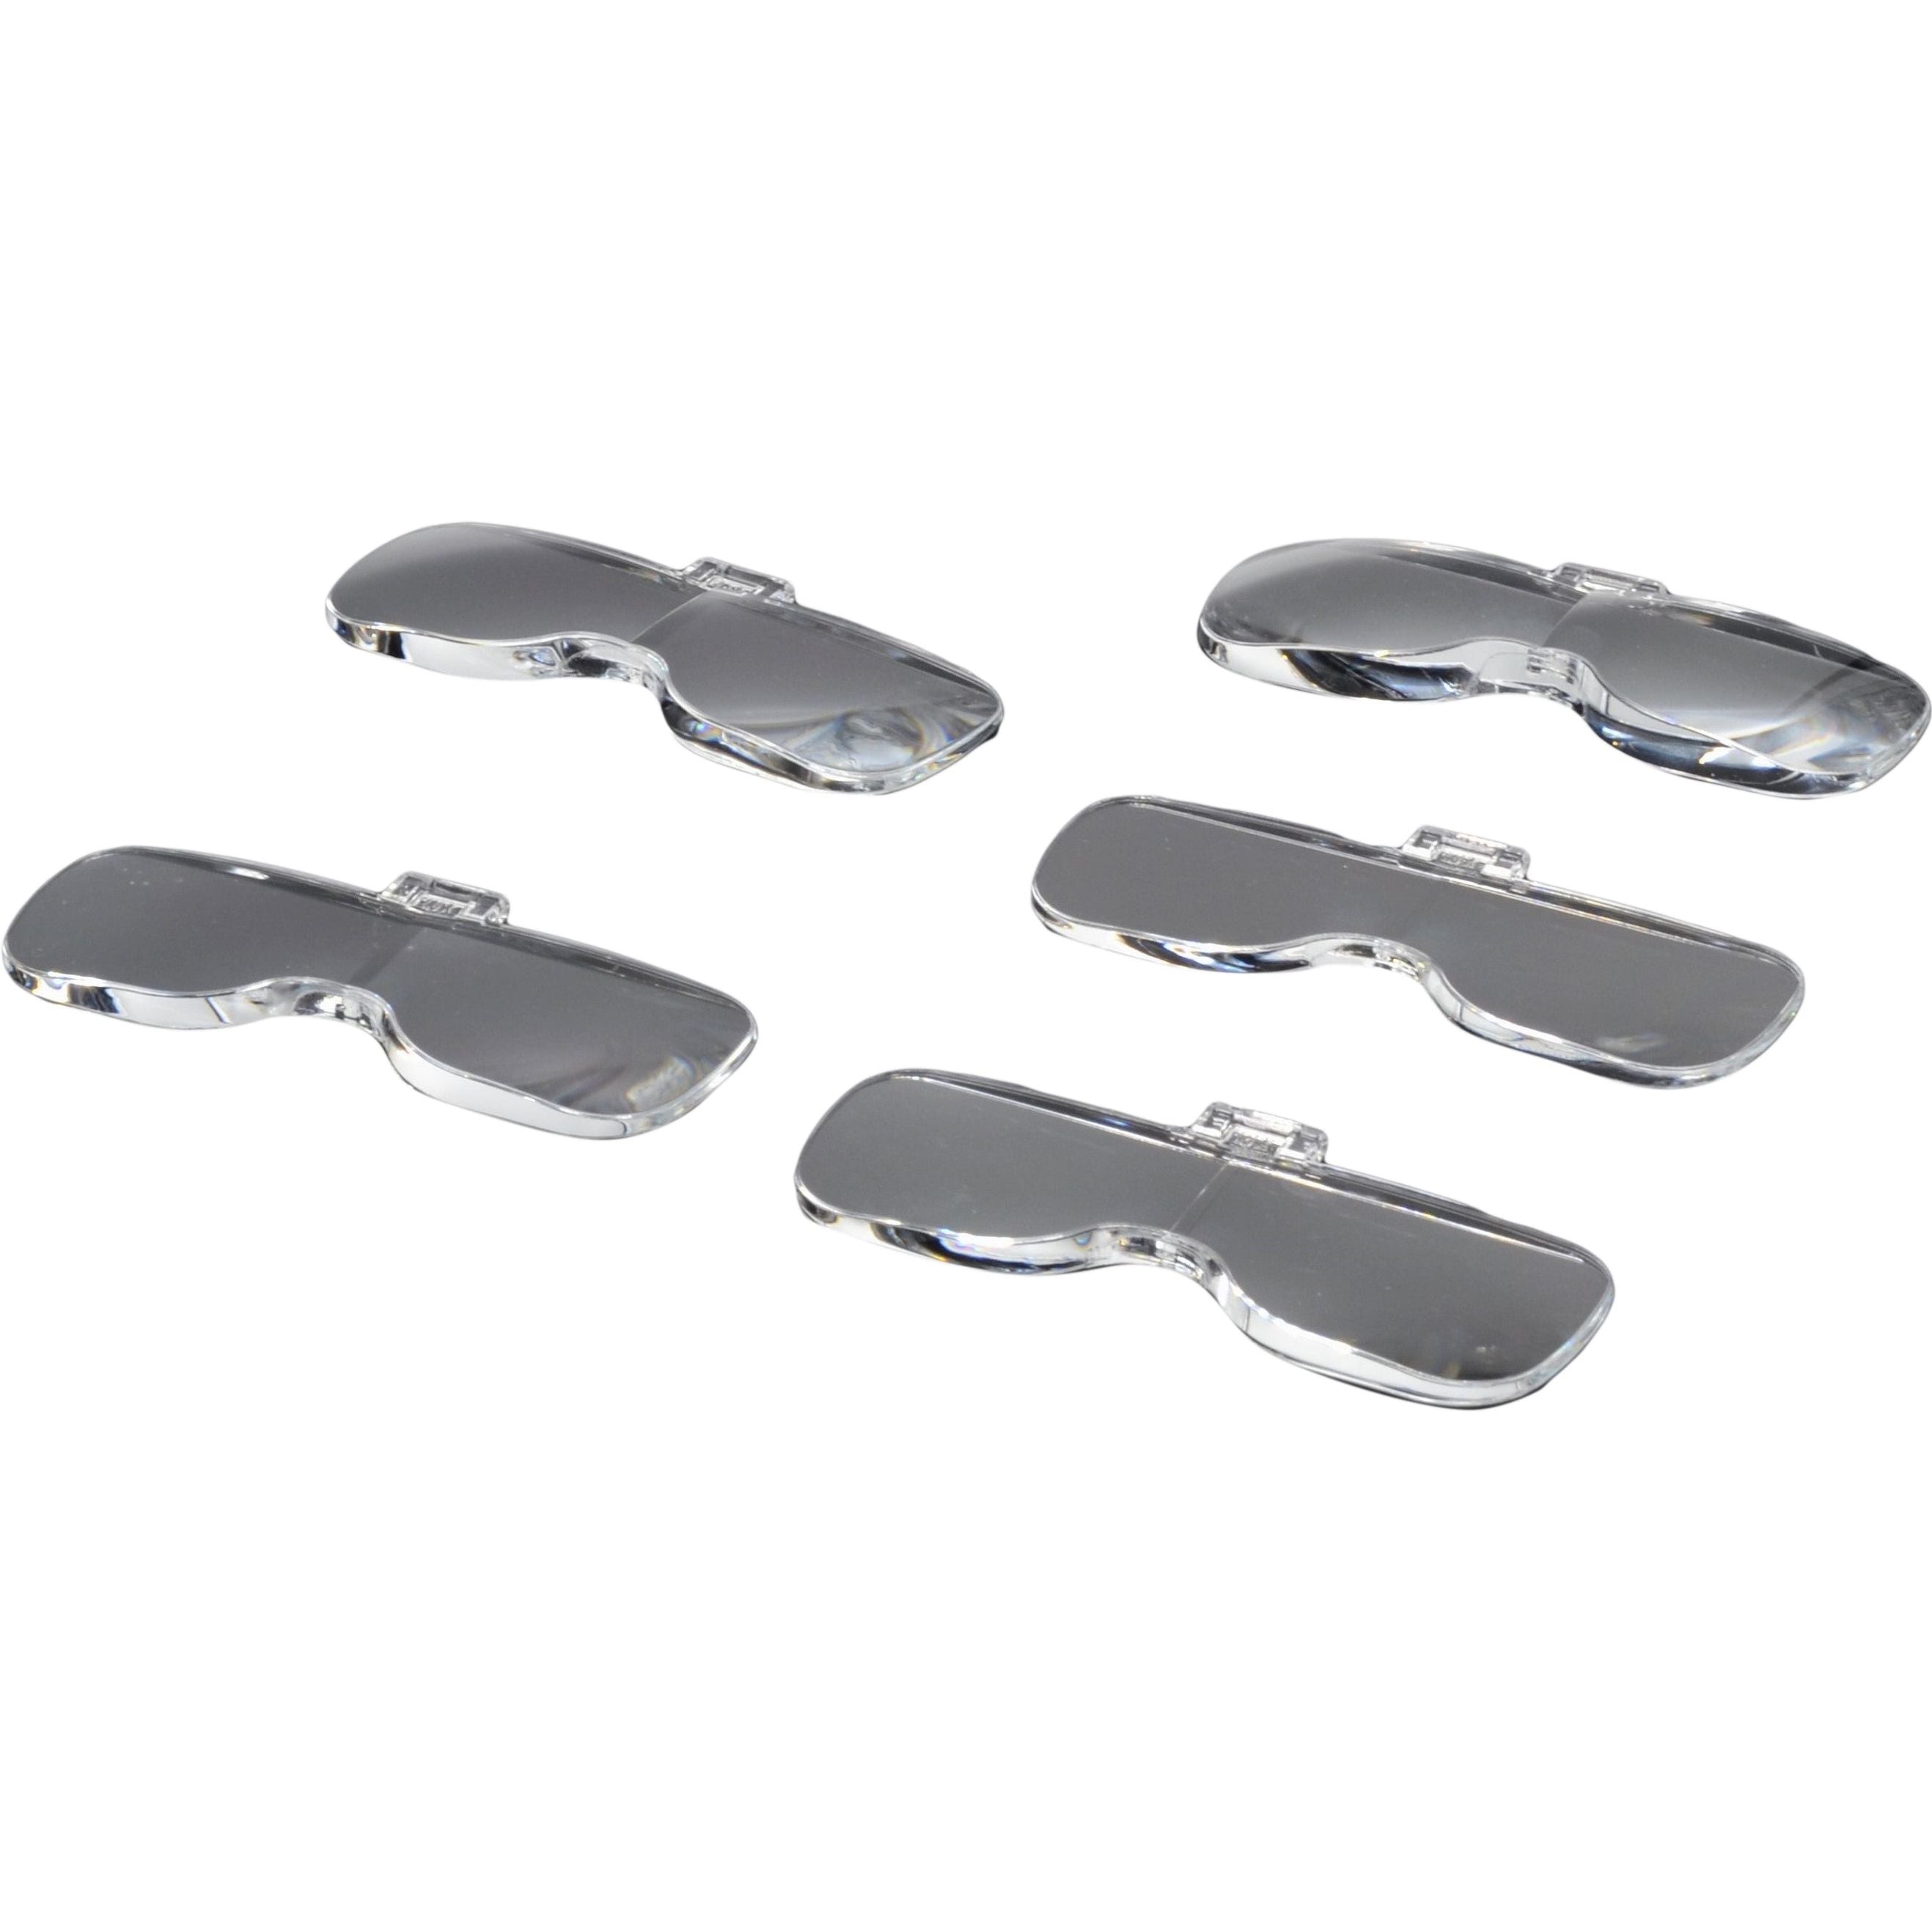 Insize Magnification Glasses (supplied with 5 lenses) - Series7523-3D5